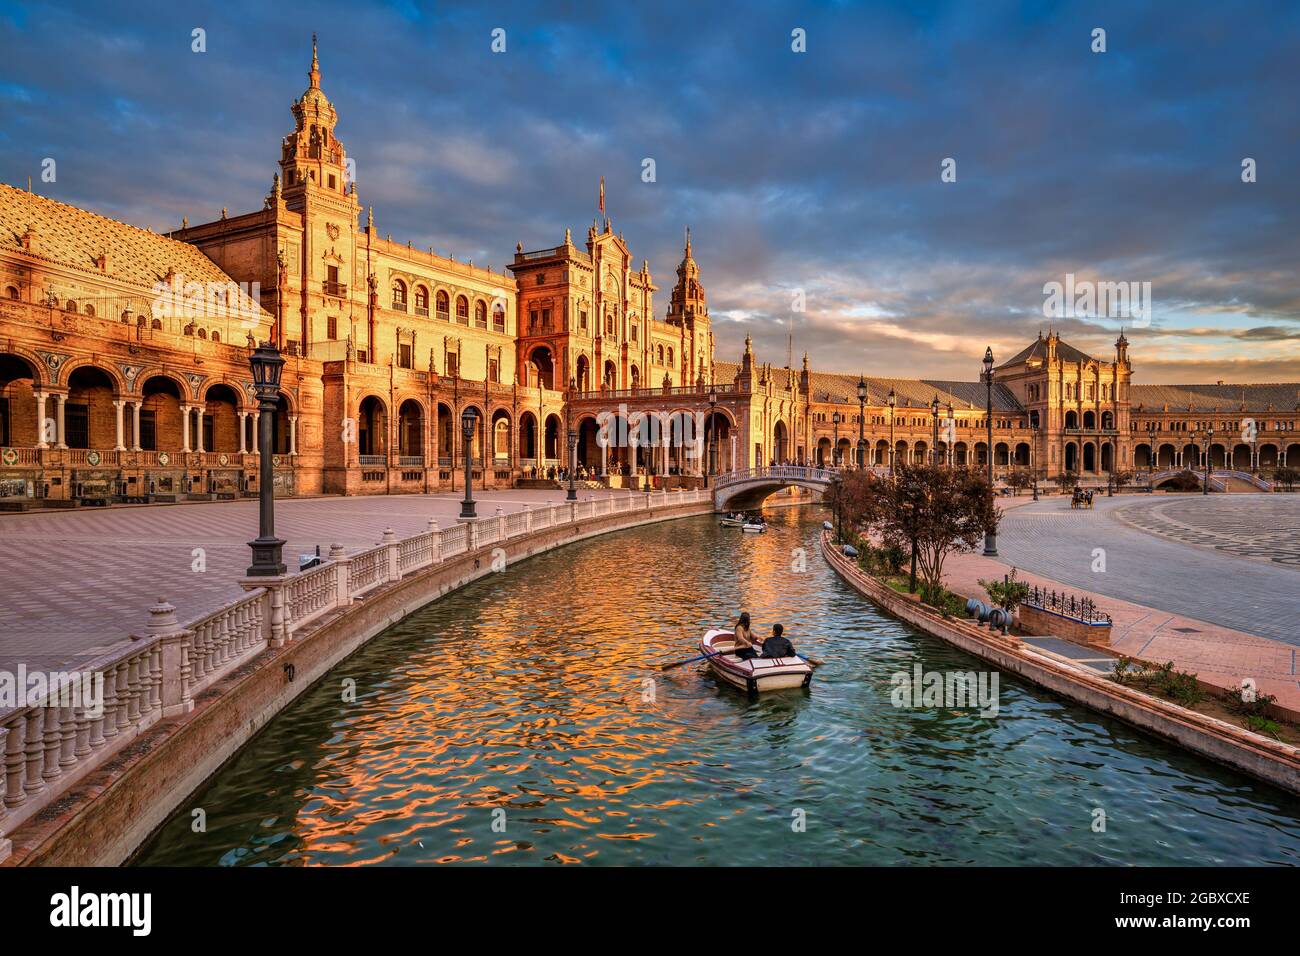 Plaza de Espana in Seville, Andalusia, Spain during sunset Stock Photo